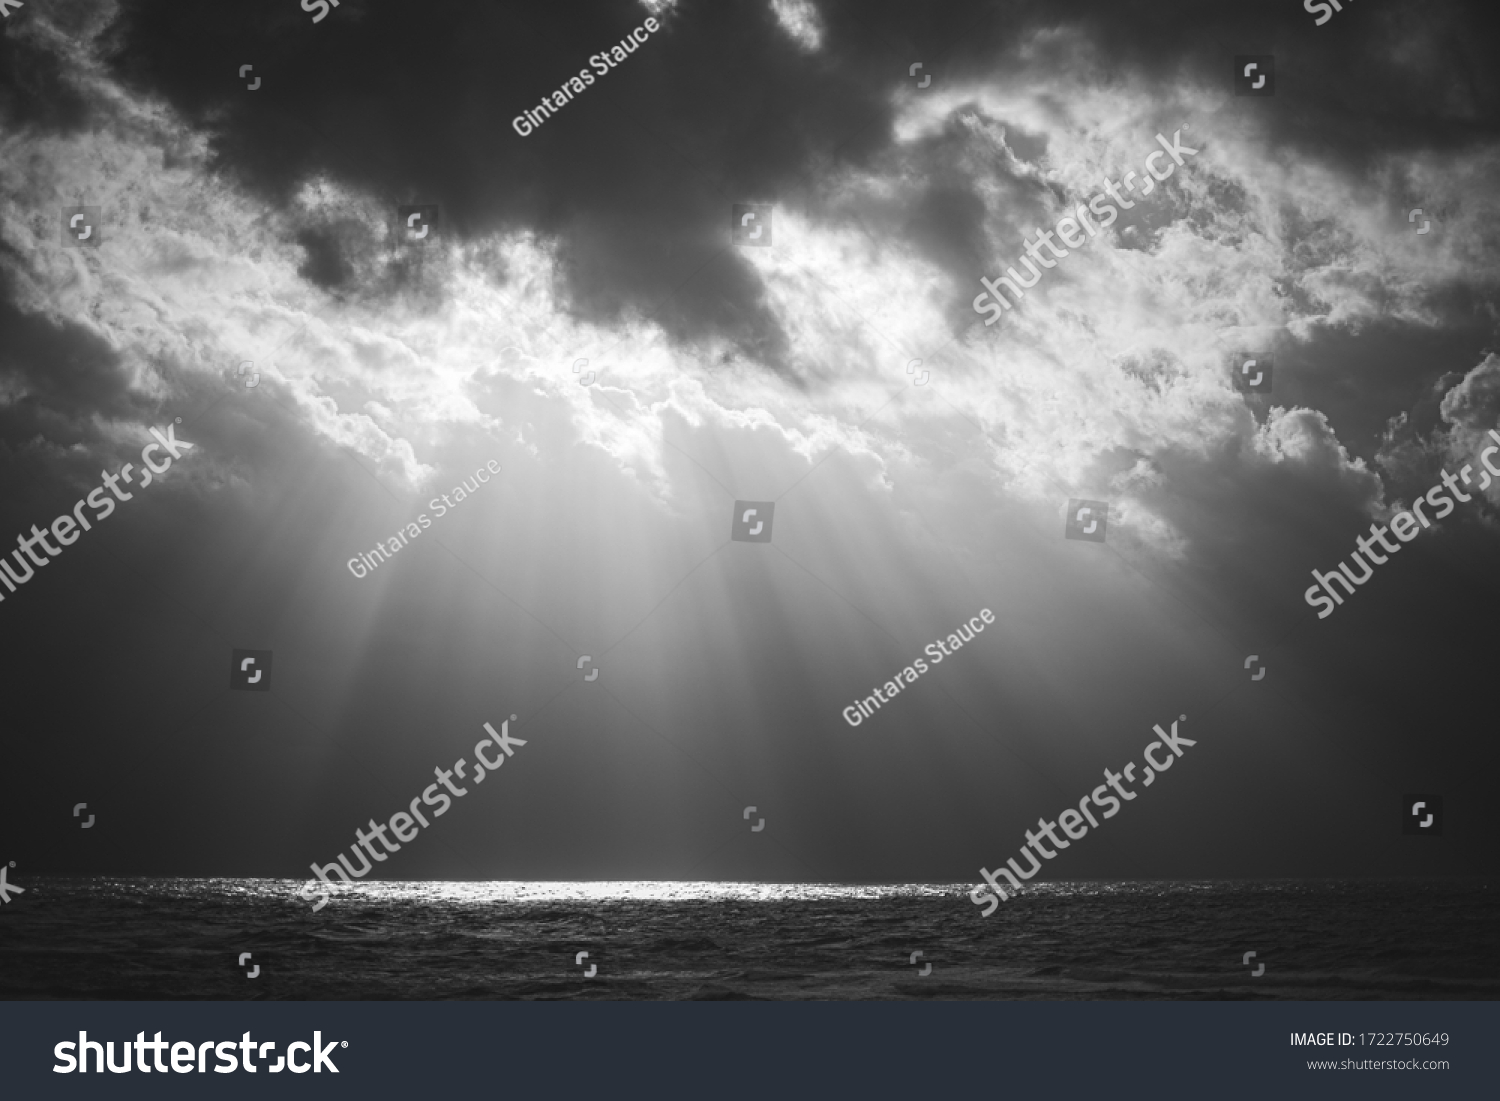 94,836 Stormy weather sea Images, Stock Photos & Vectors | Shutterstock